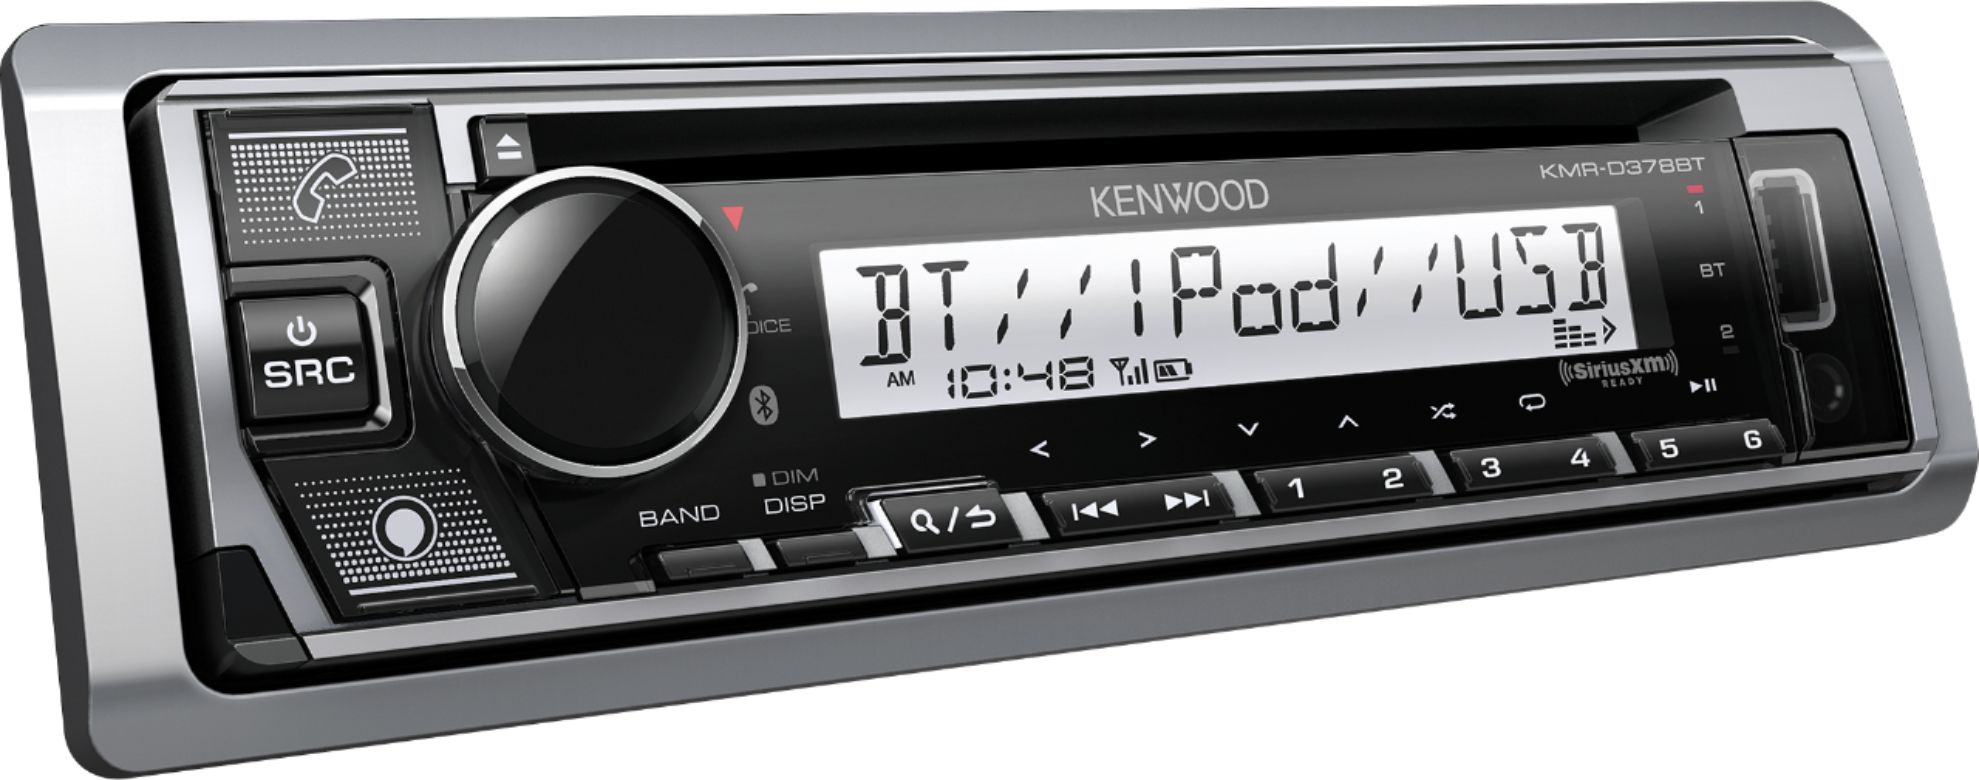 Angle View: Kenwood KMR-D378BT Marine/Powersports Single-DIN In-Dash CD Receiver with Bluetooth, Electronic Voice Assistant and SiriusXM Ready